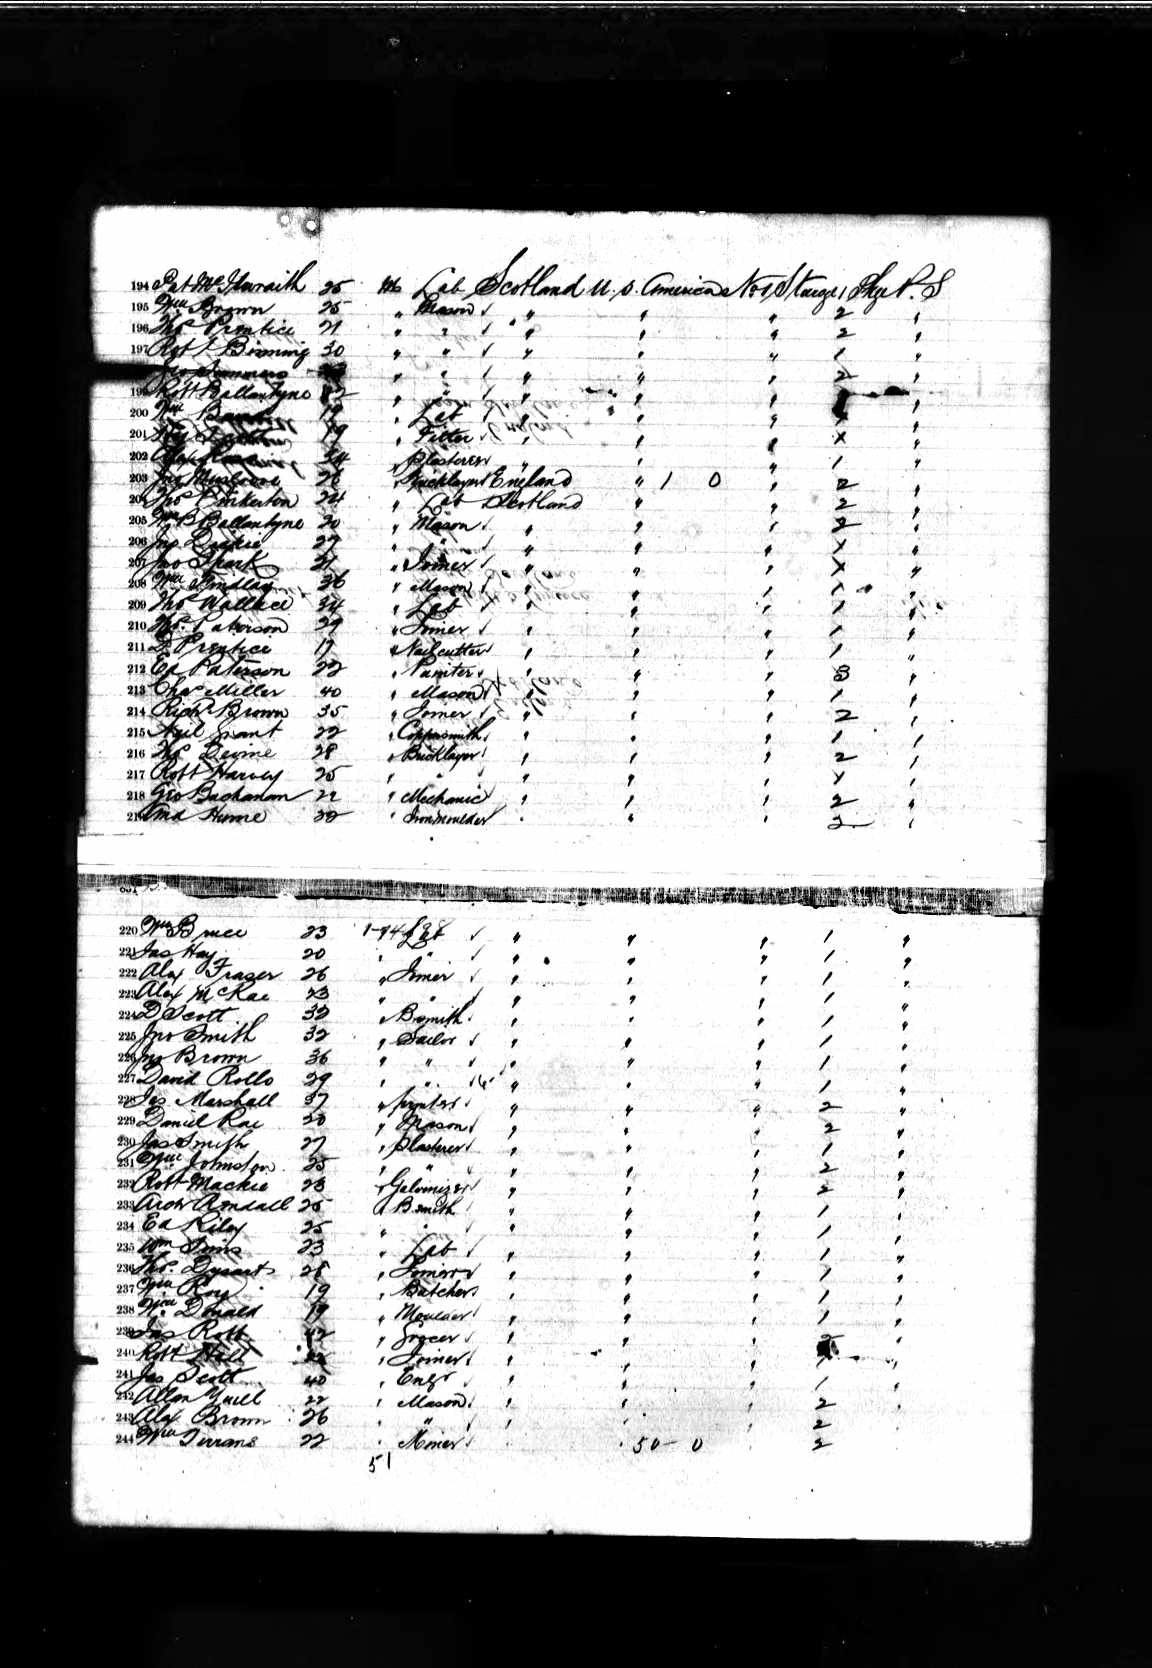 William Donald, likely immigration (ship's manifest), 1887, New York